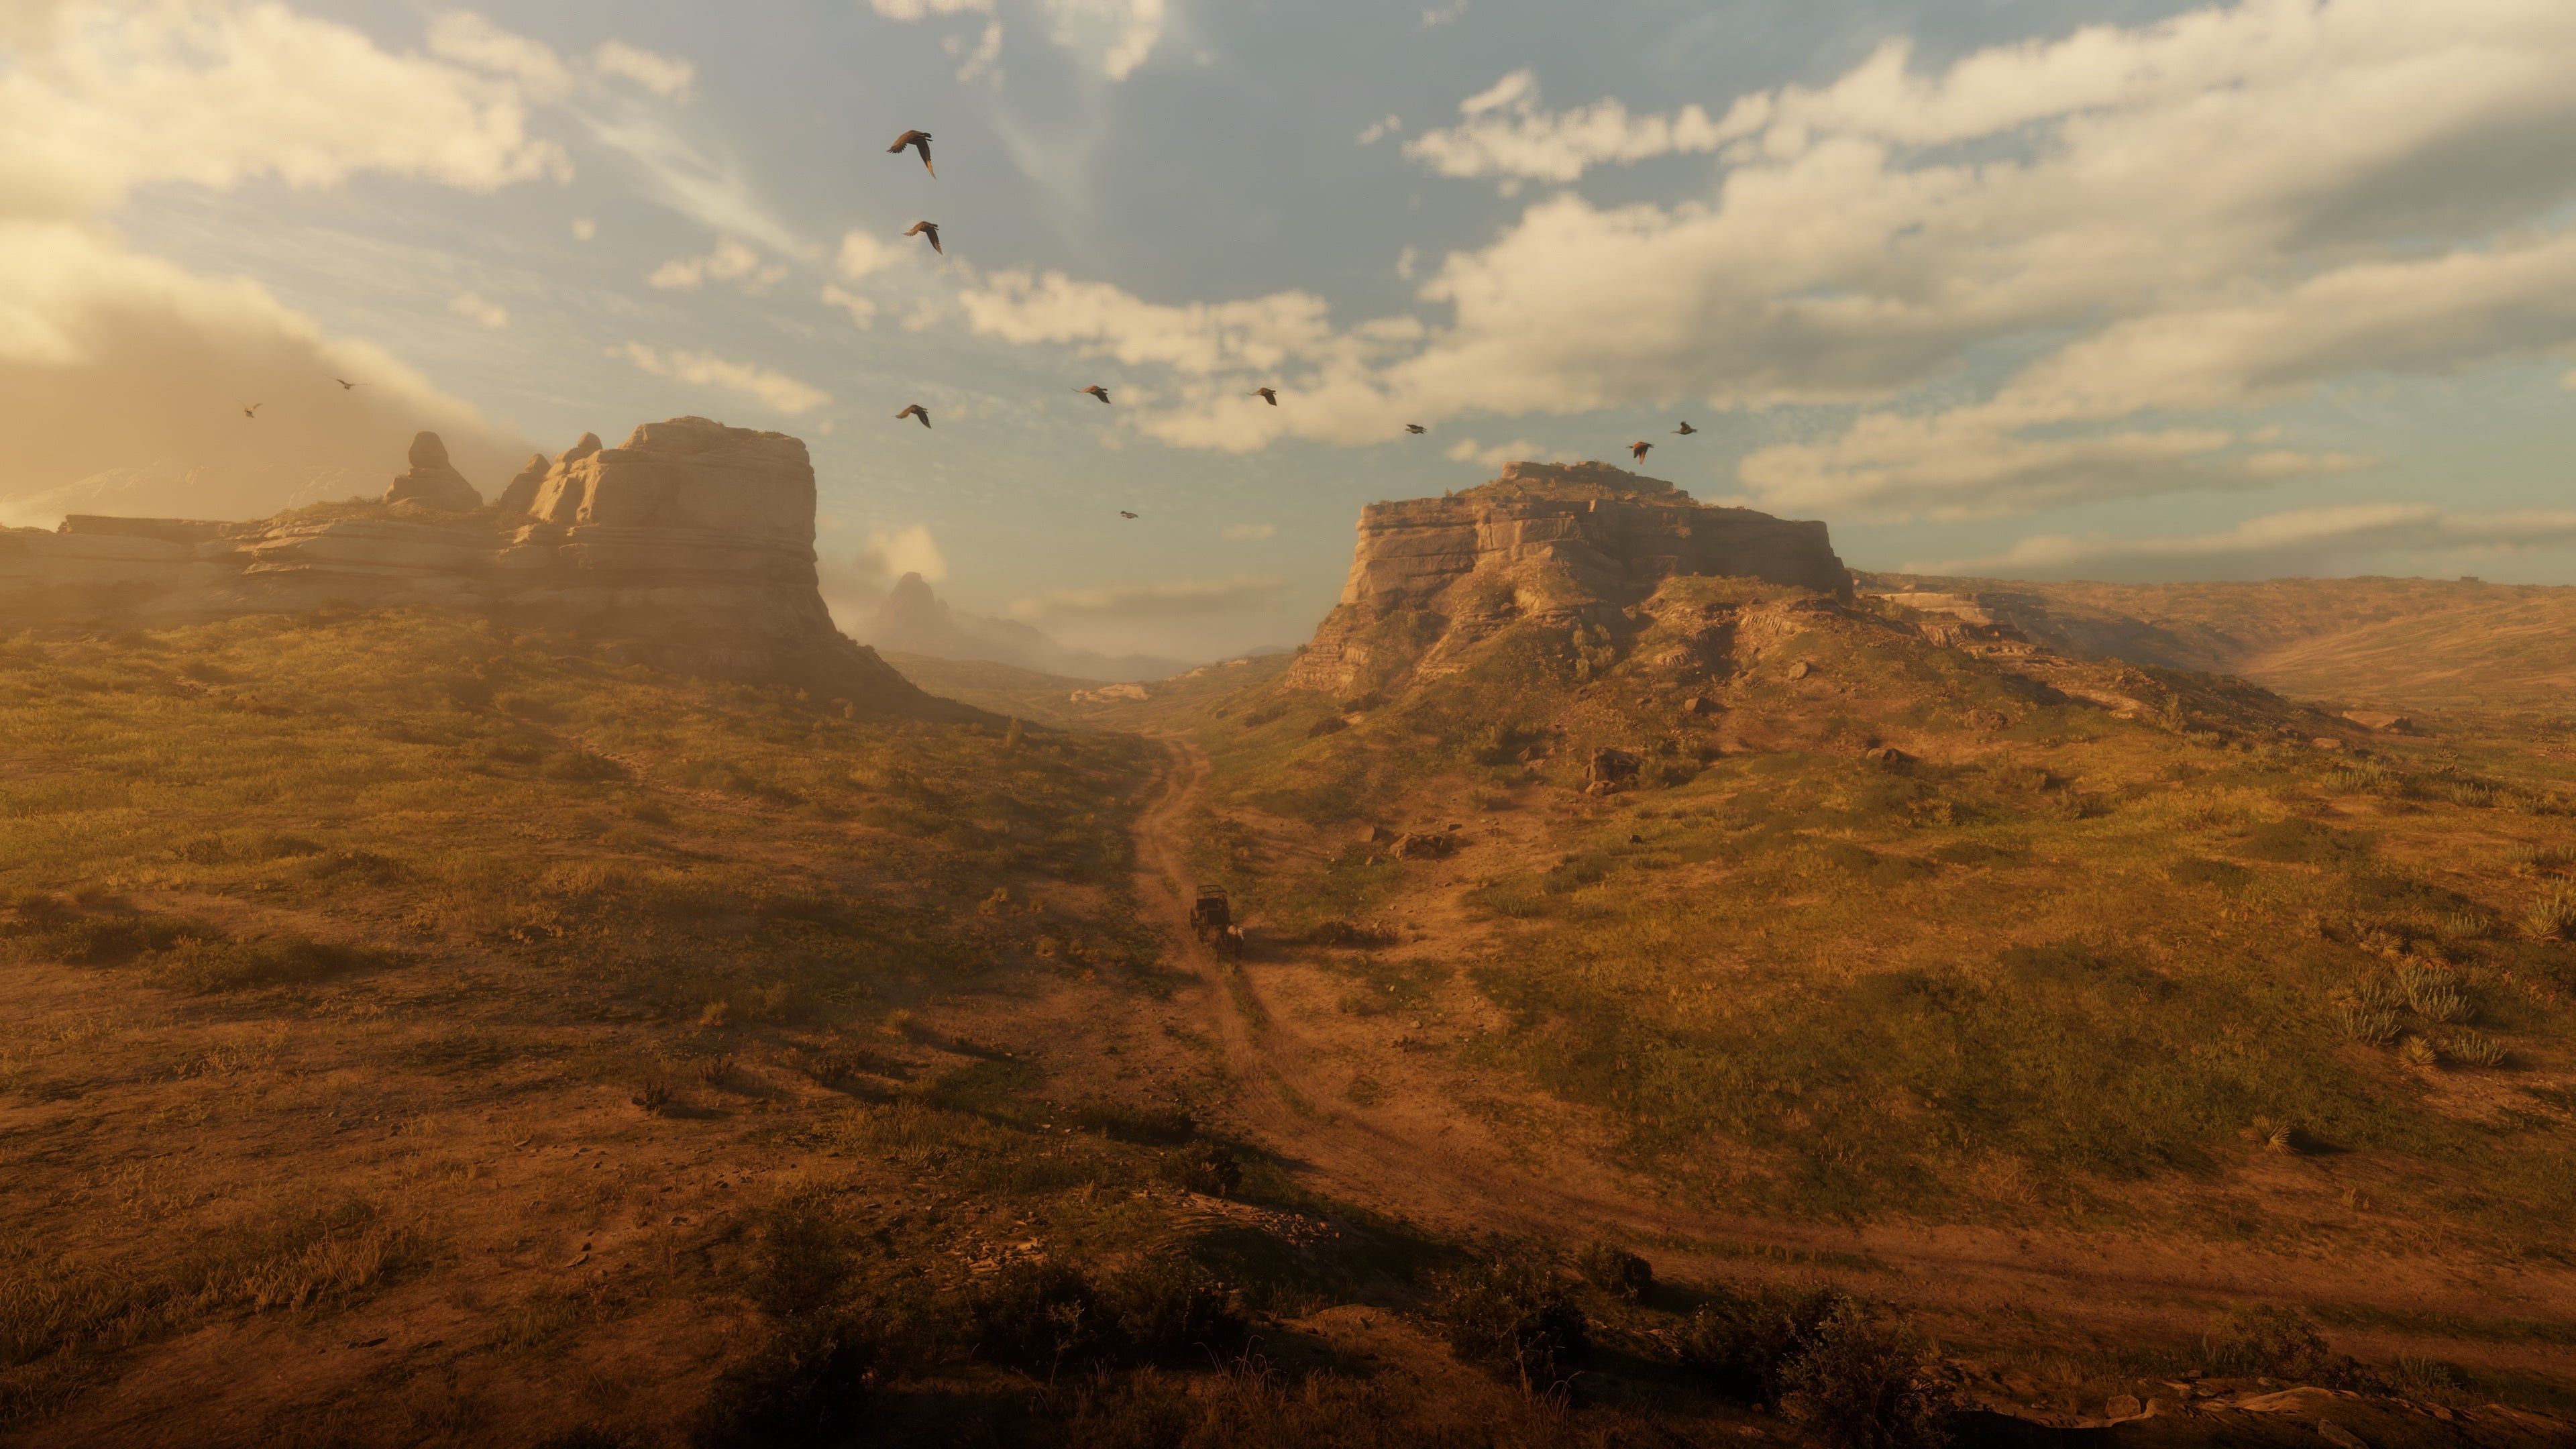 Here are 17 new beautiful 4K screenshots from the PC version of Red Dead Redemption 2